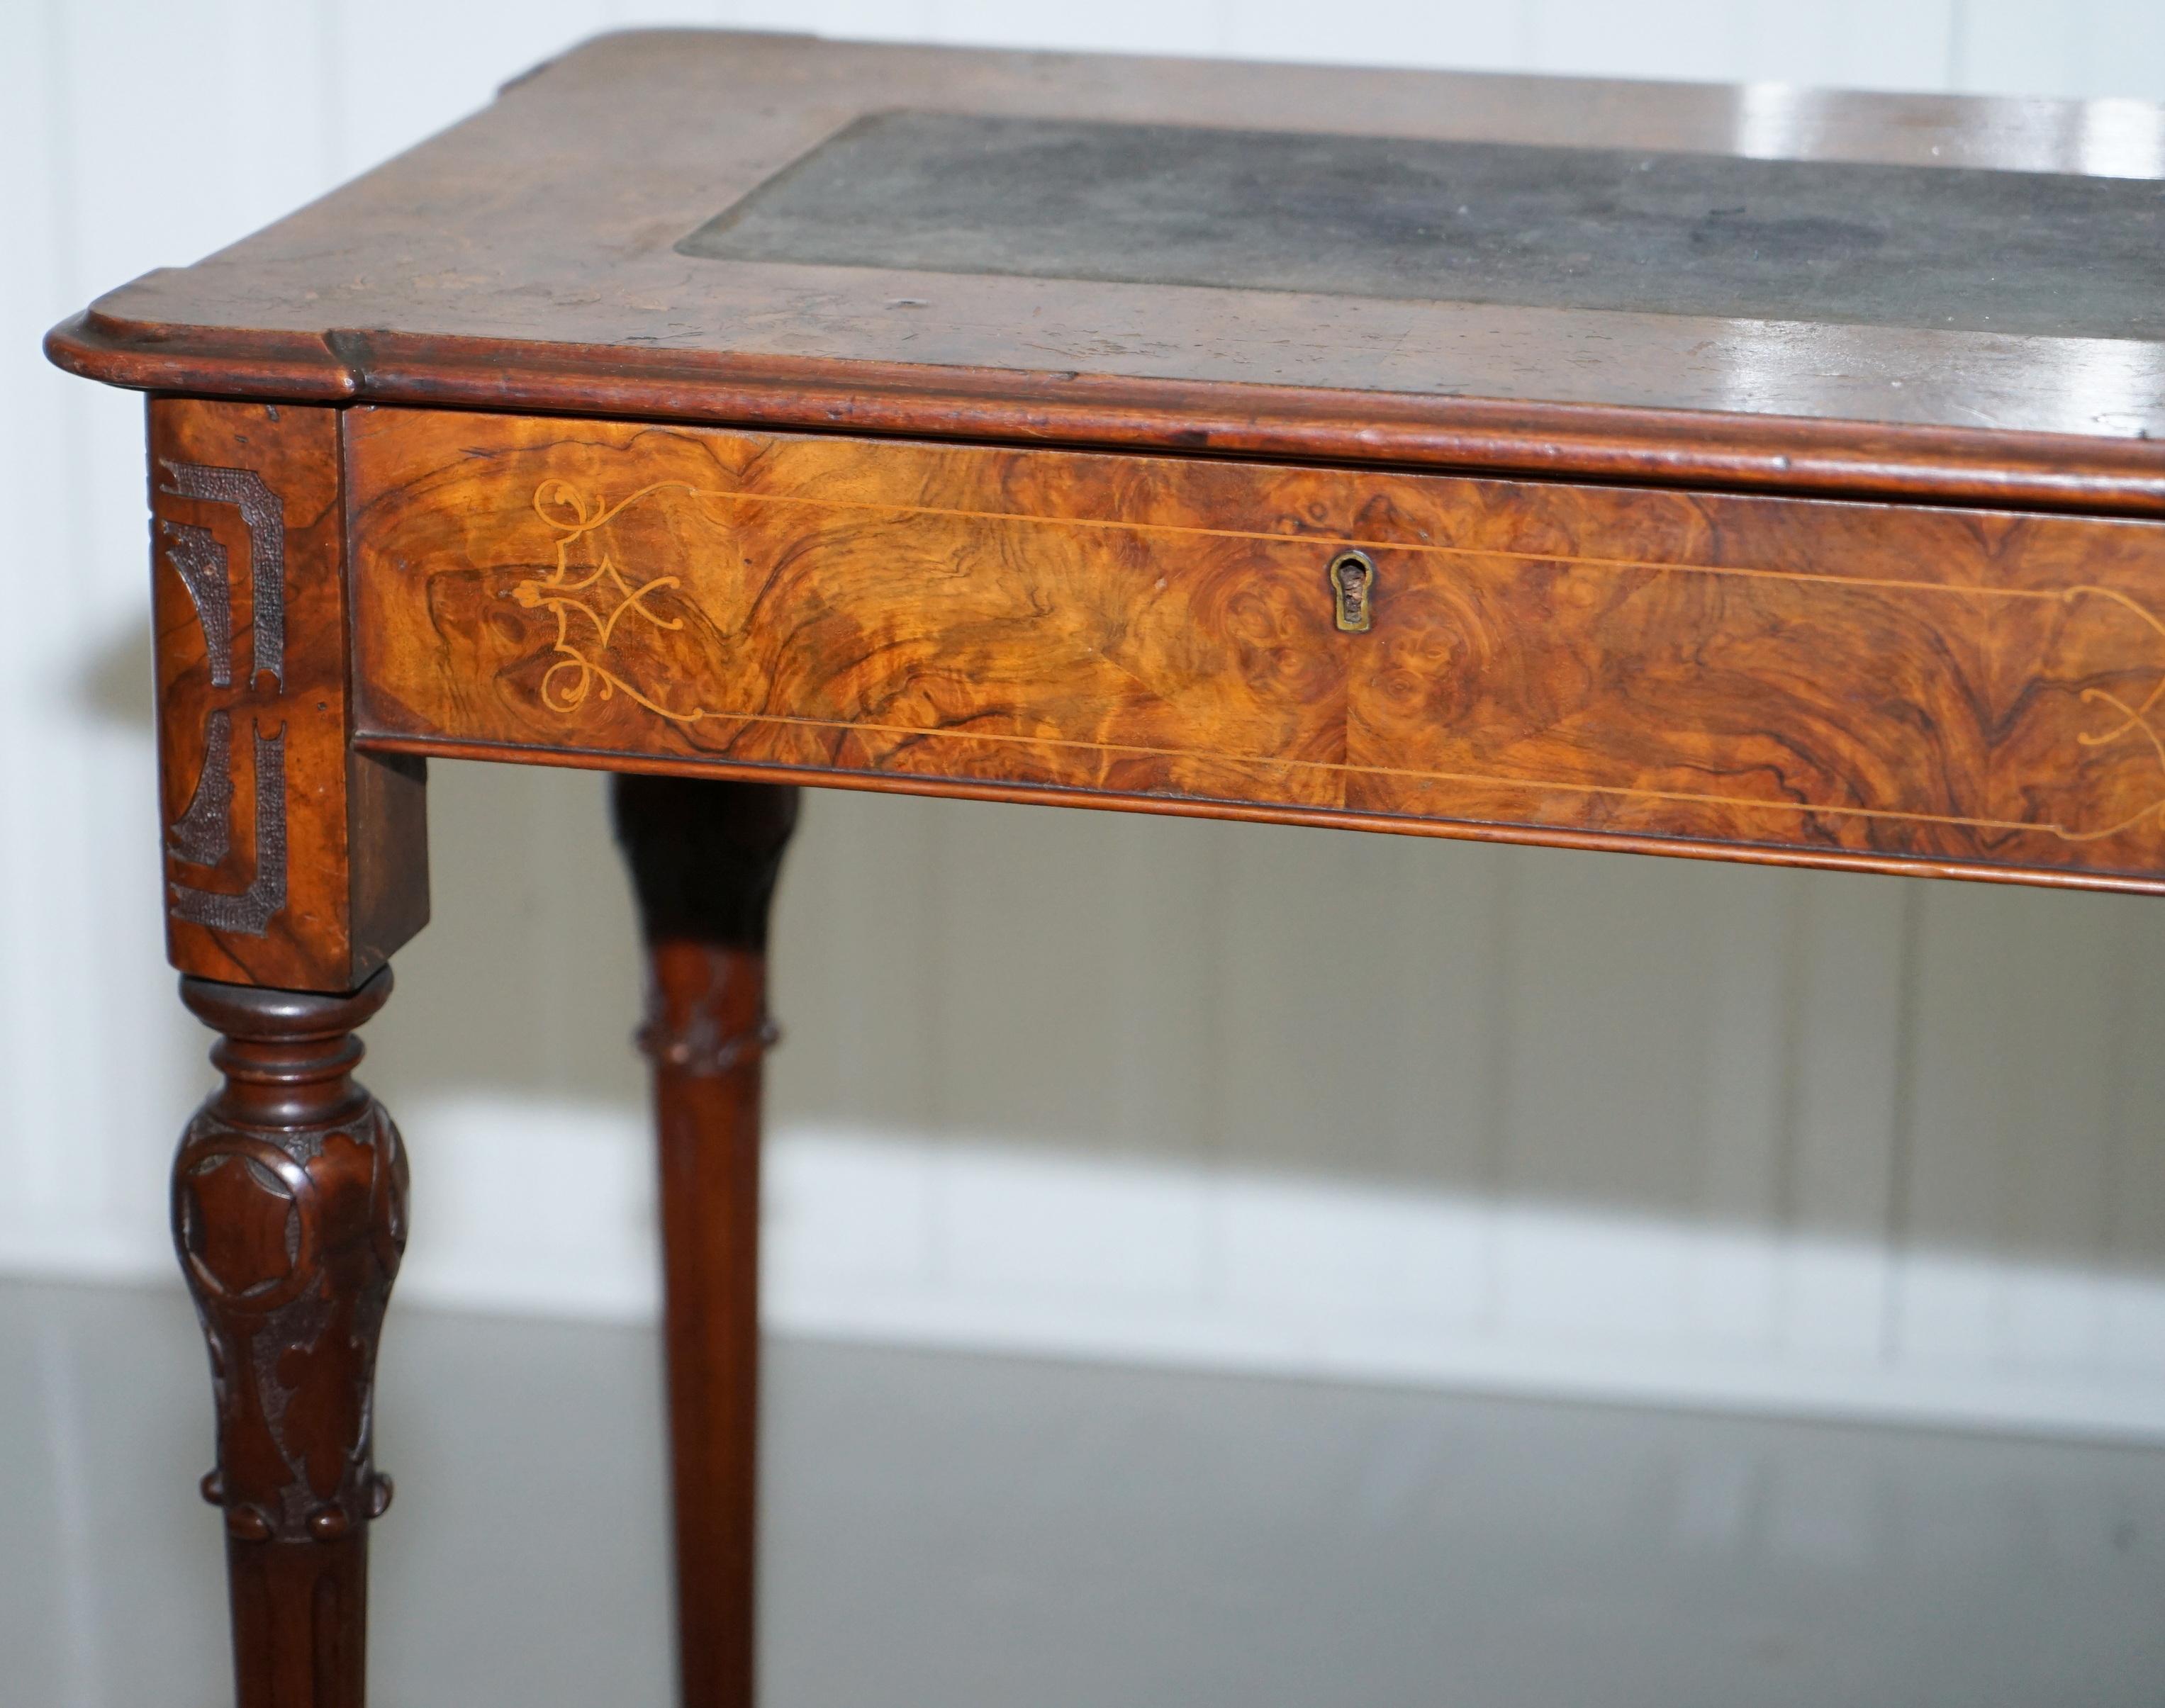 Stunning Rare Early Victorian Burr Walnut Games Table Lift Top Fret Work Carved 1